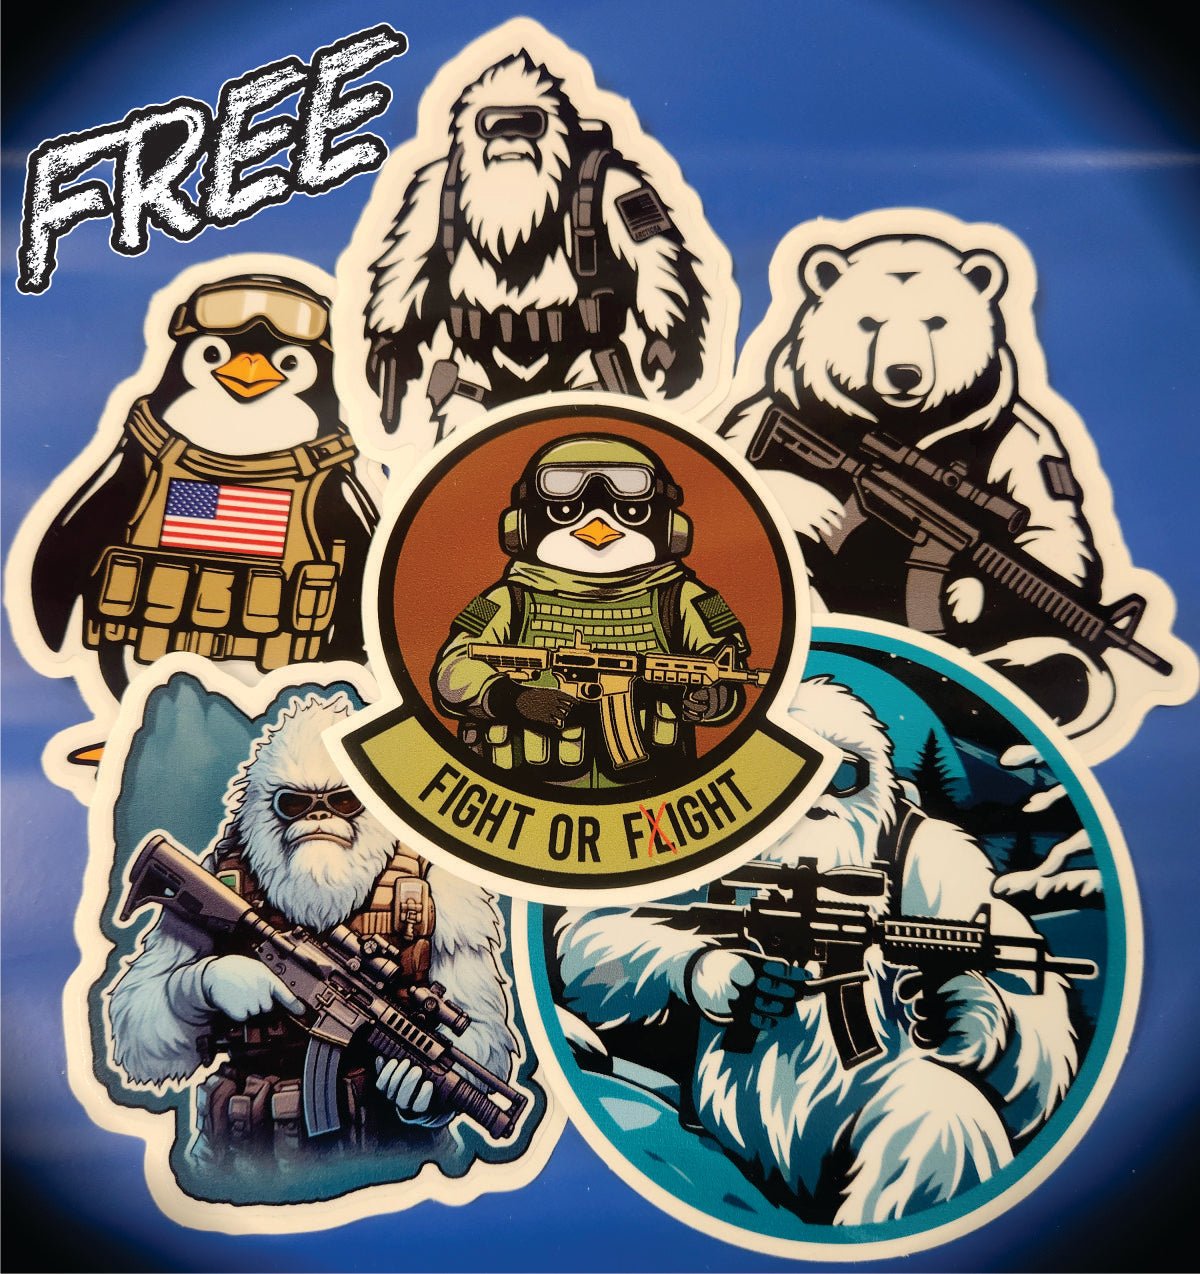 Winter Collection Patch Bundle Pack - Get all Six of our amazing Winter Collection designs! BONUS FREE STICKER SET